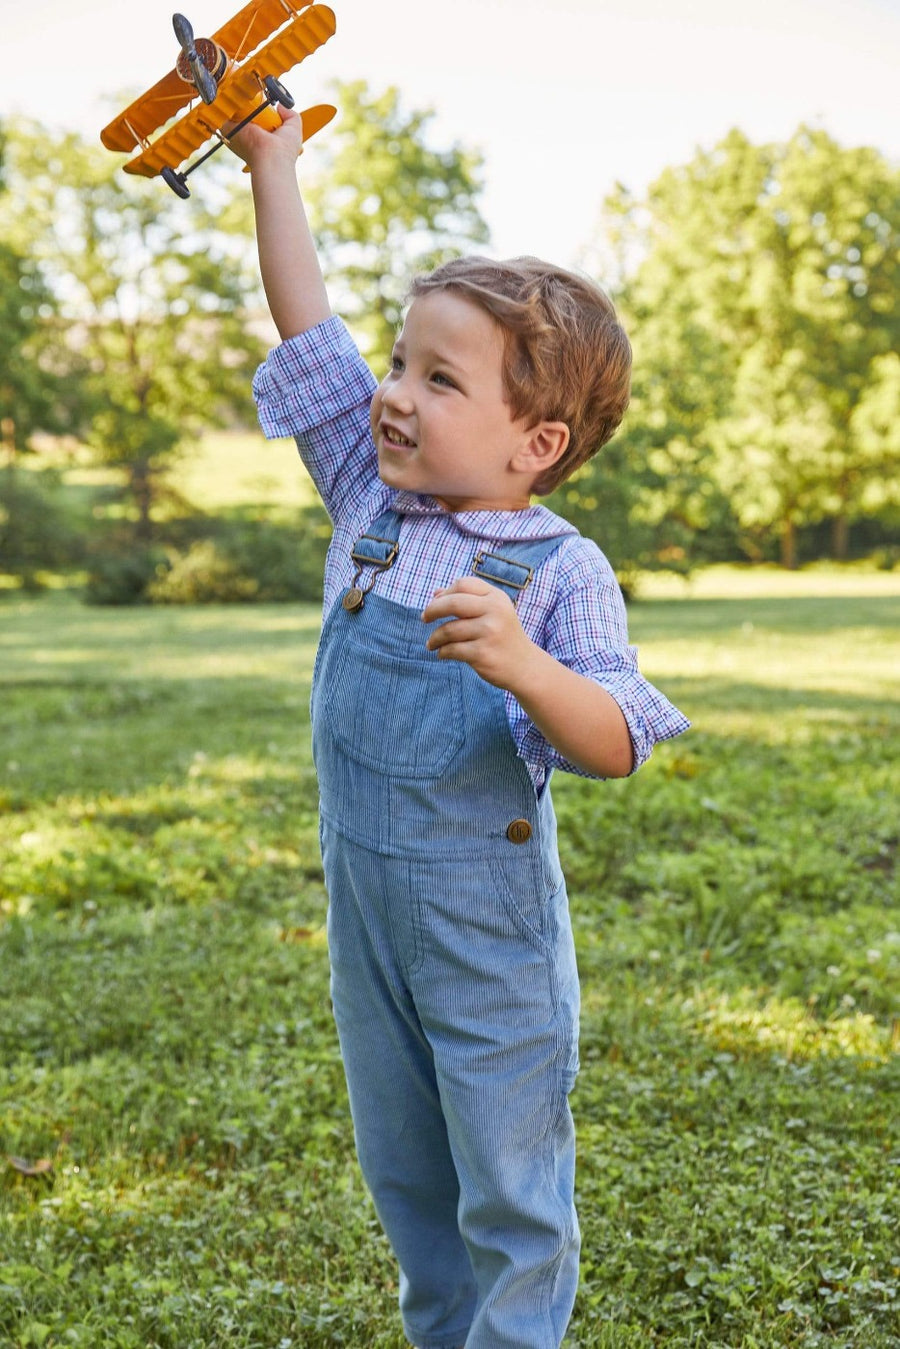 Little English essential overall in stormy blue corduroy, boy's or girl's overall for fall, traditional kid's clothing